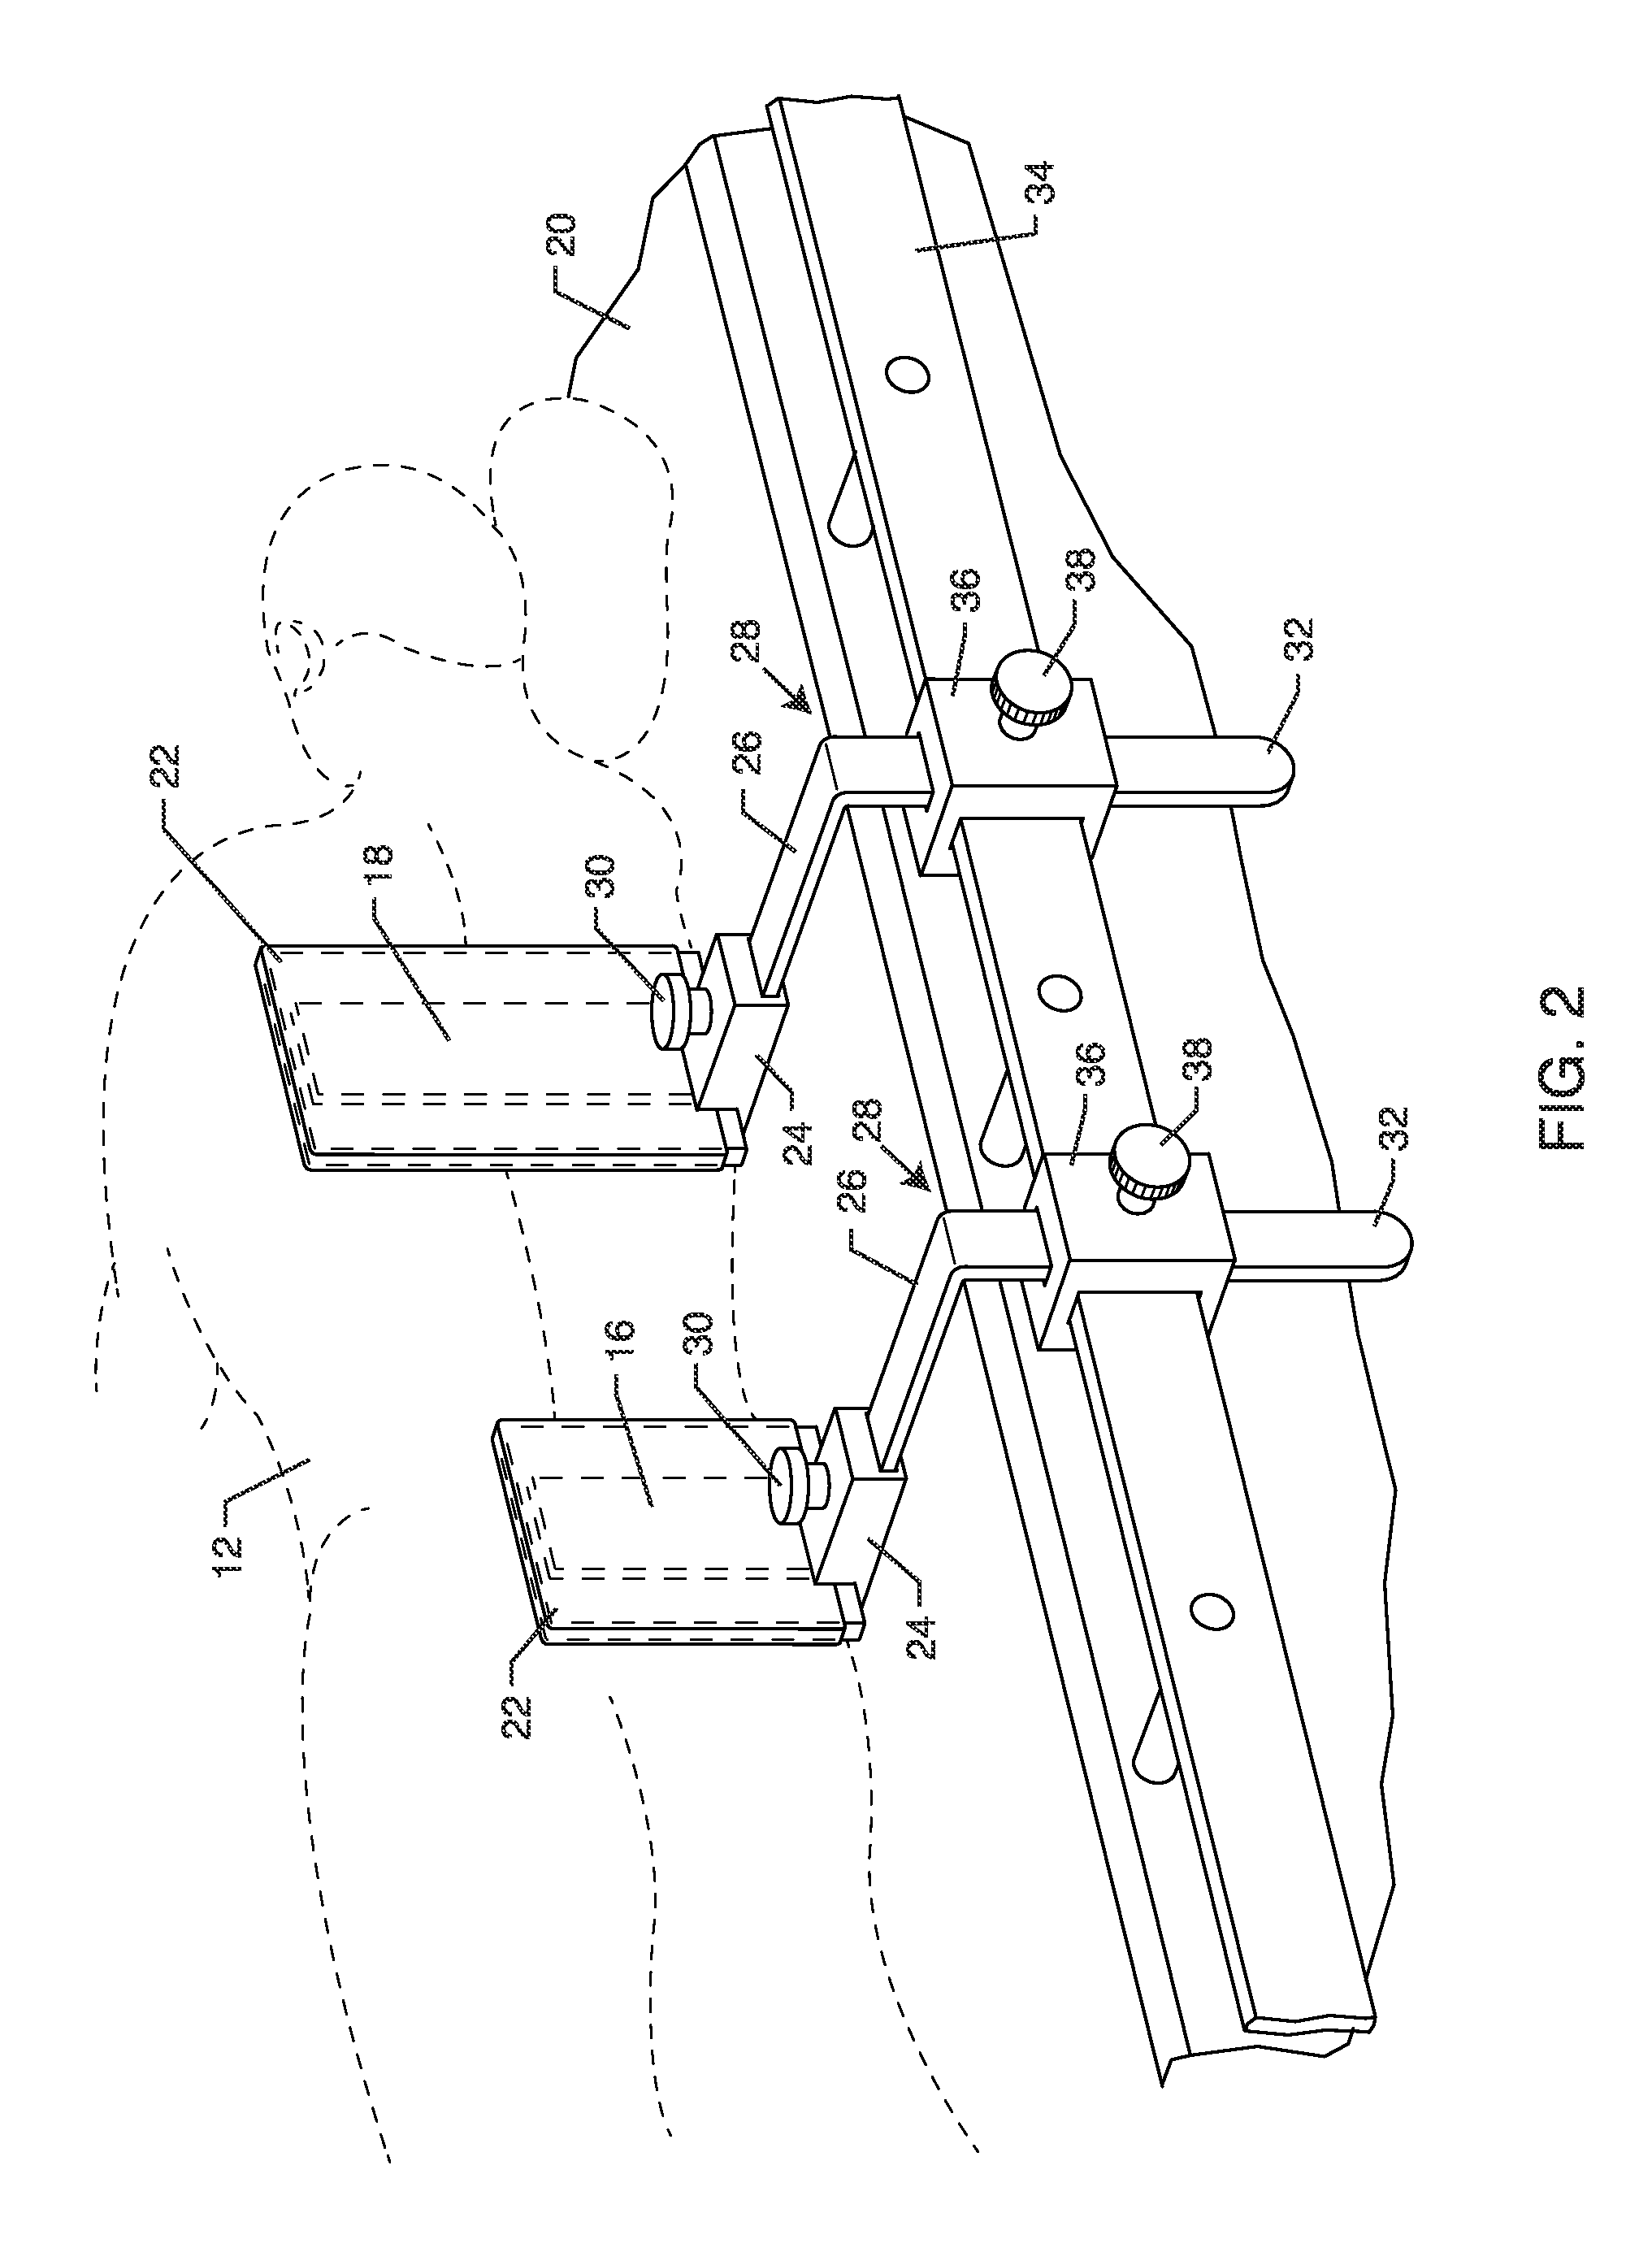 Anterior pelvic support device for a surgery patient